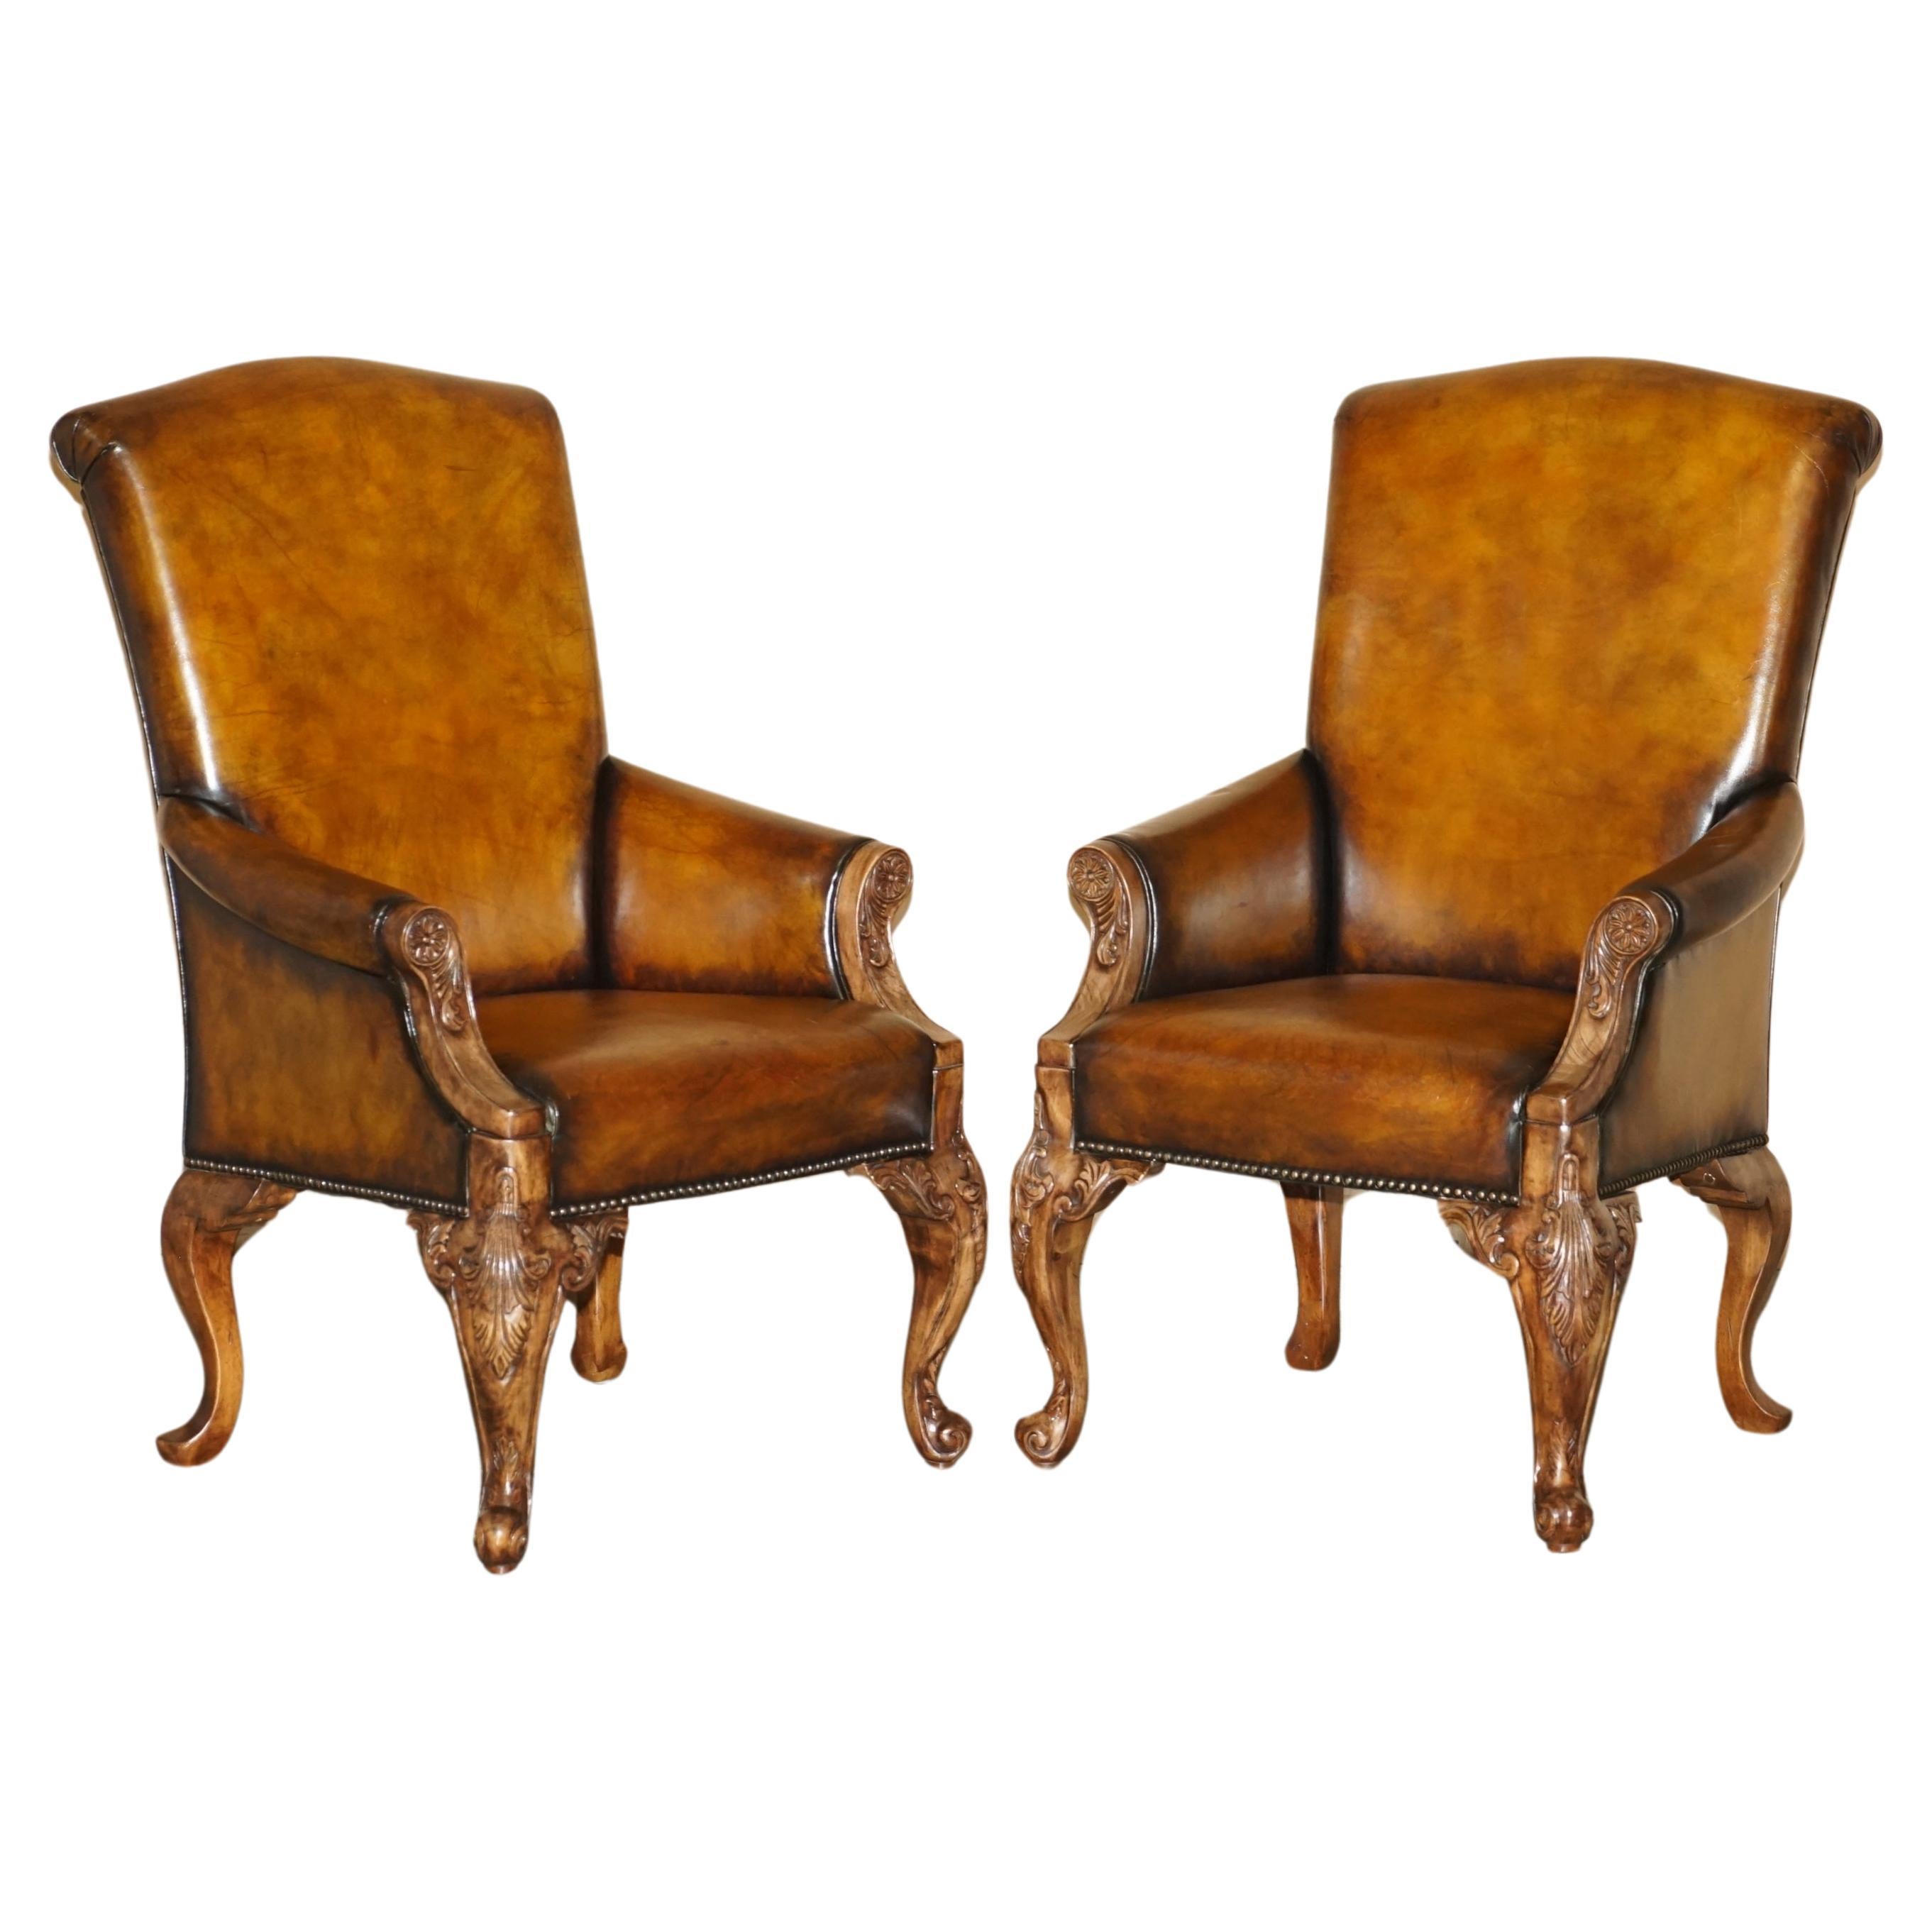 PAIR OF ANTIQUE HEAVILY CARved HAND DYED BROWN LEATHER RESTORED THRONE ARMCHAIRs im Angebot